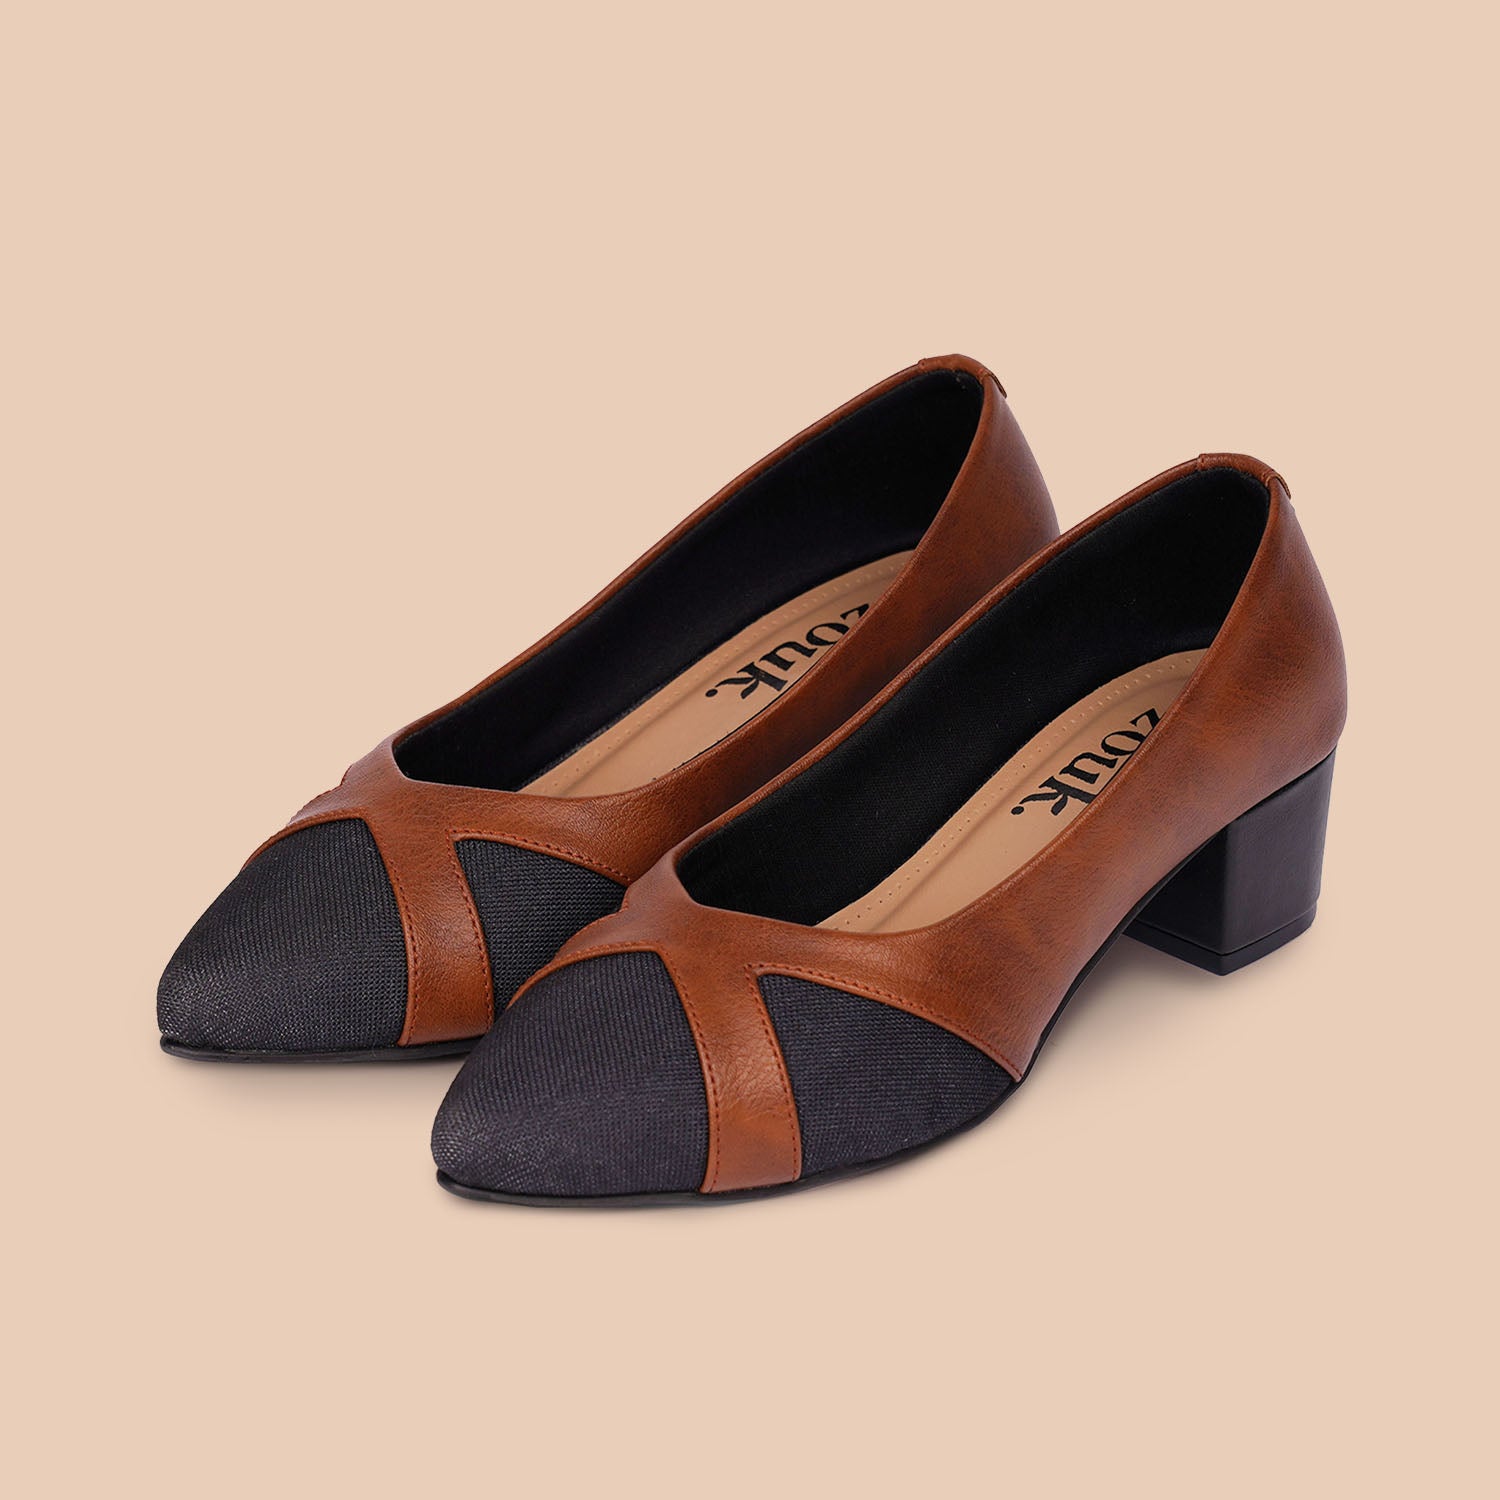 Buy Klaur Melbourne Pumps For Women ( Brown ) Online at Low Prices in India  - Paytmmall.com